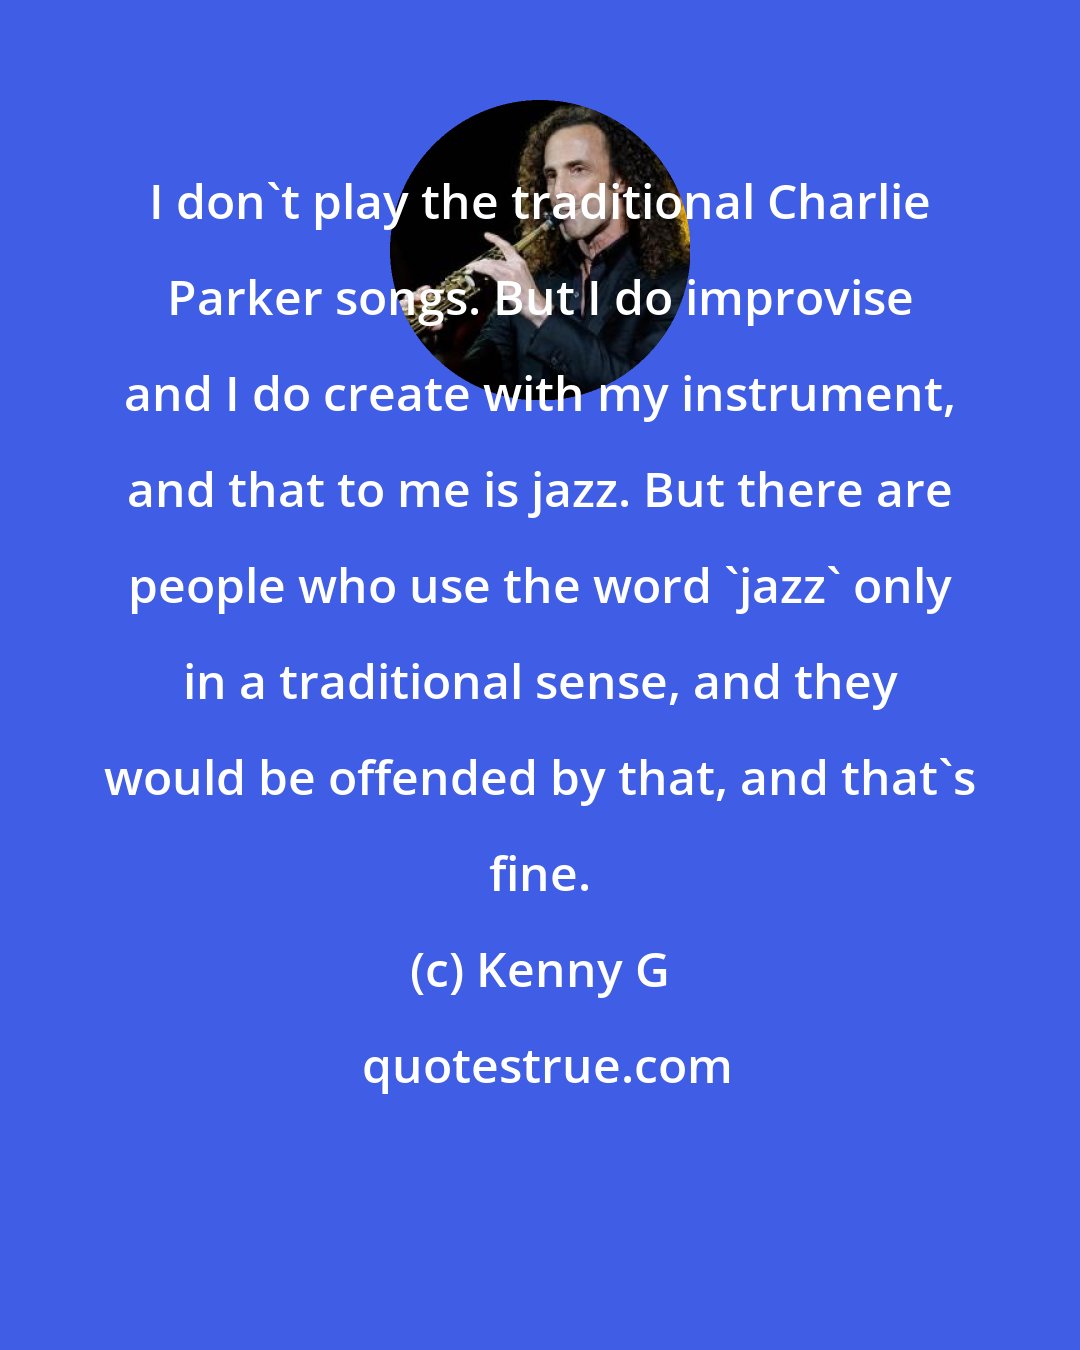 Kenny G: I don't play the traditional Charlie Parker songs. But I do improvise and I do create with my instrument, and that to me is jazz. But there are people who use the word 'jazz' only in a traditional sense, and they would be offended by that, and that's fine.